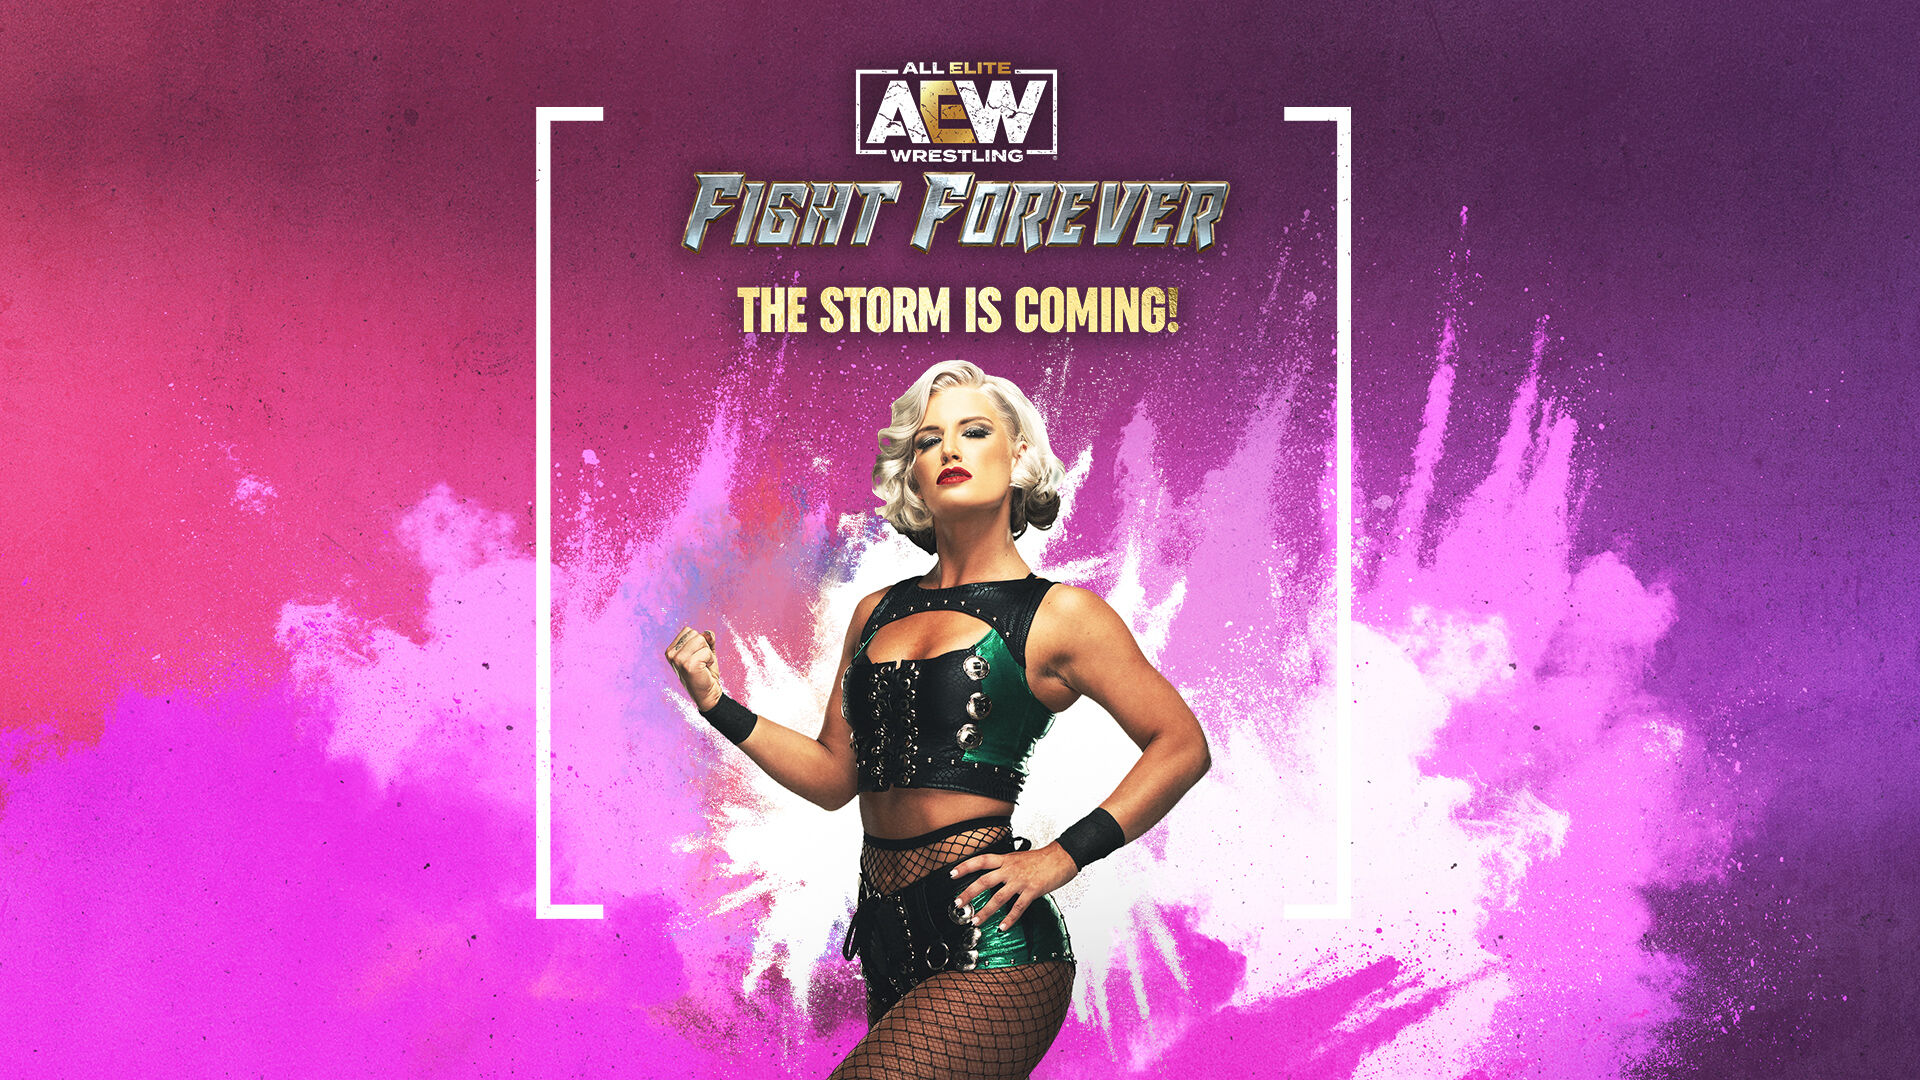 AEW: Fight Forever Bring the Boom Edition ダウンロード版 | My 